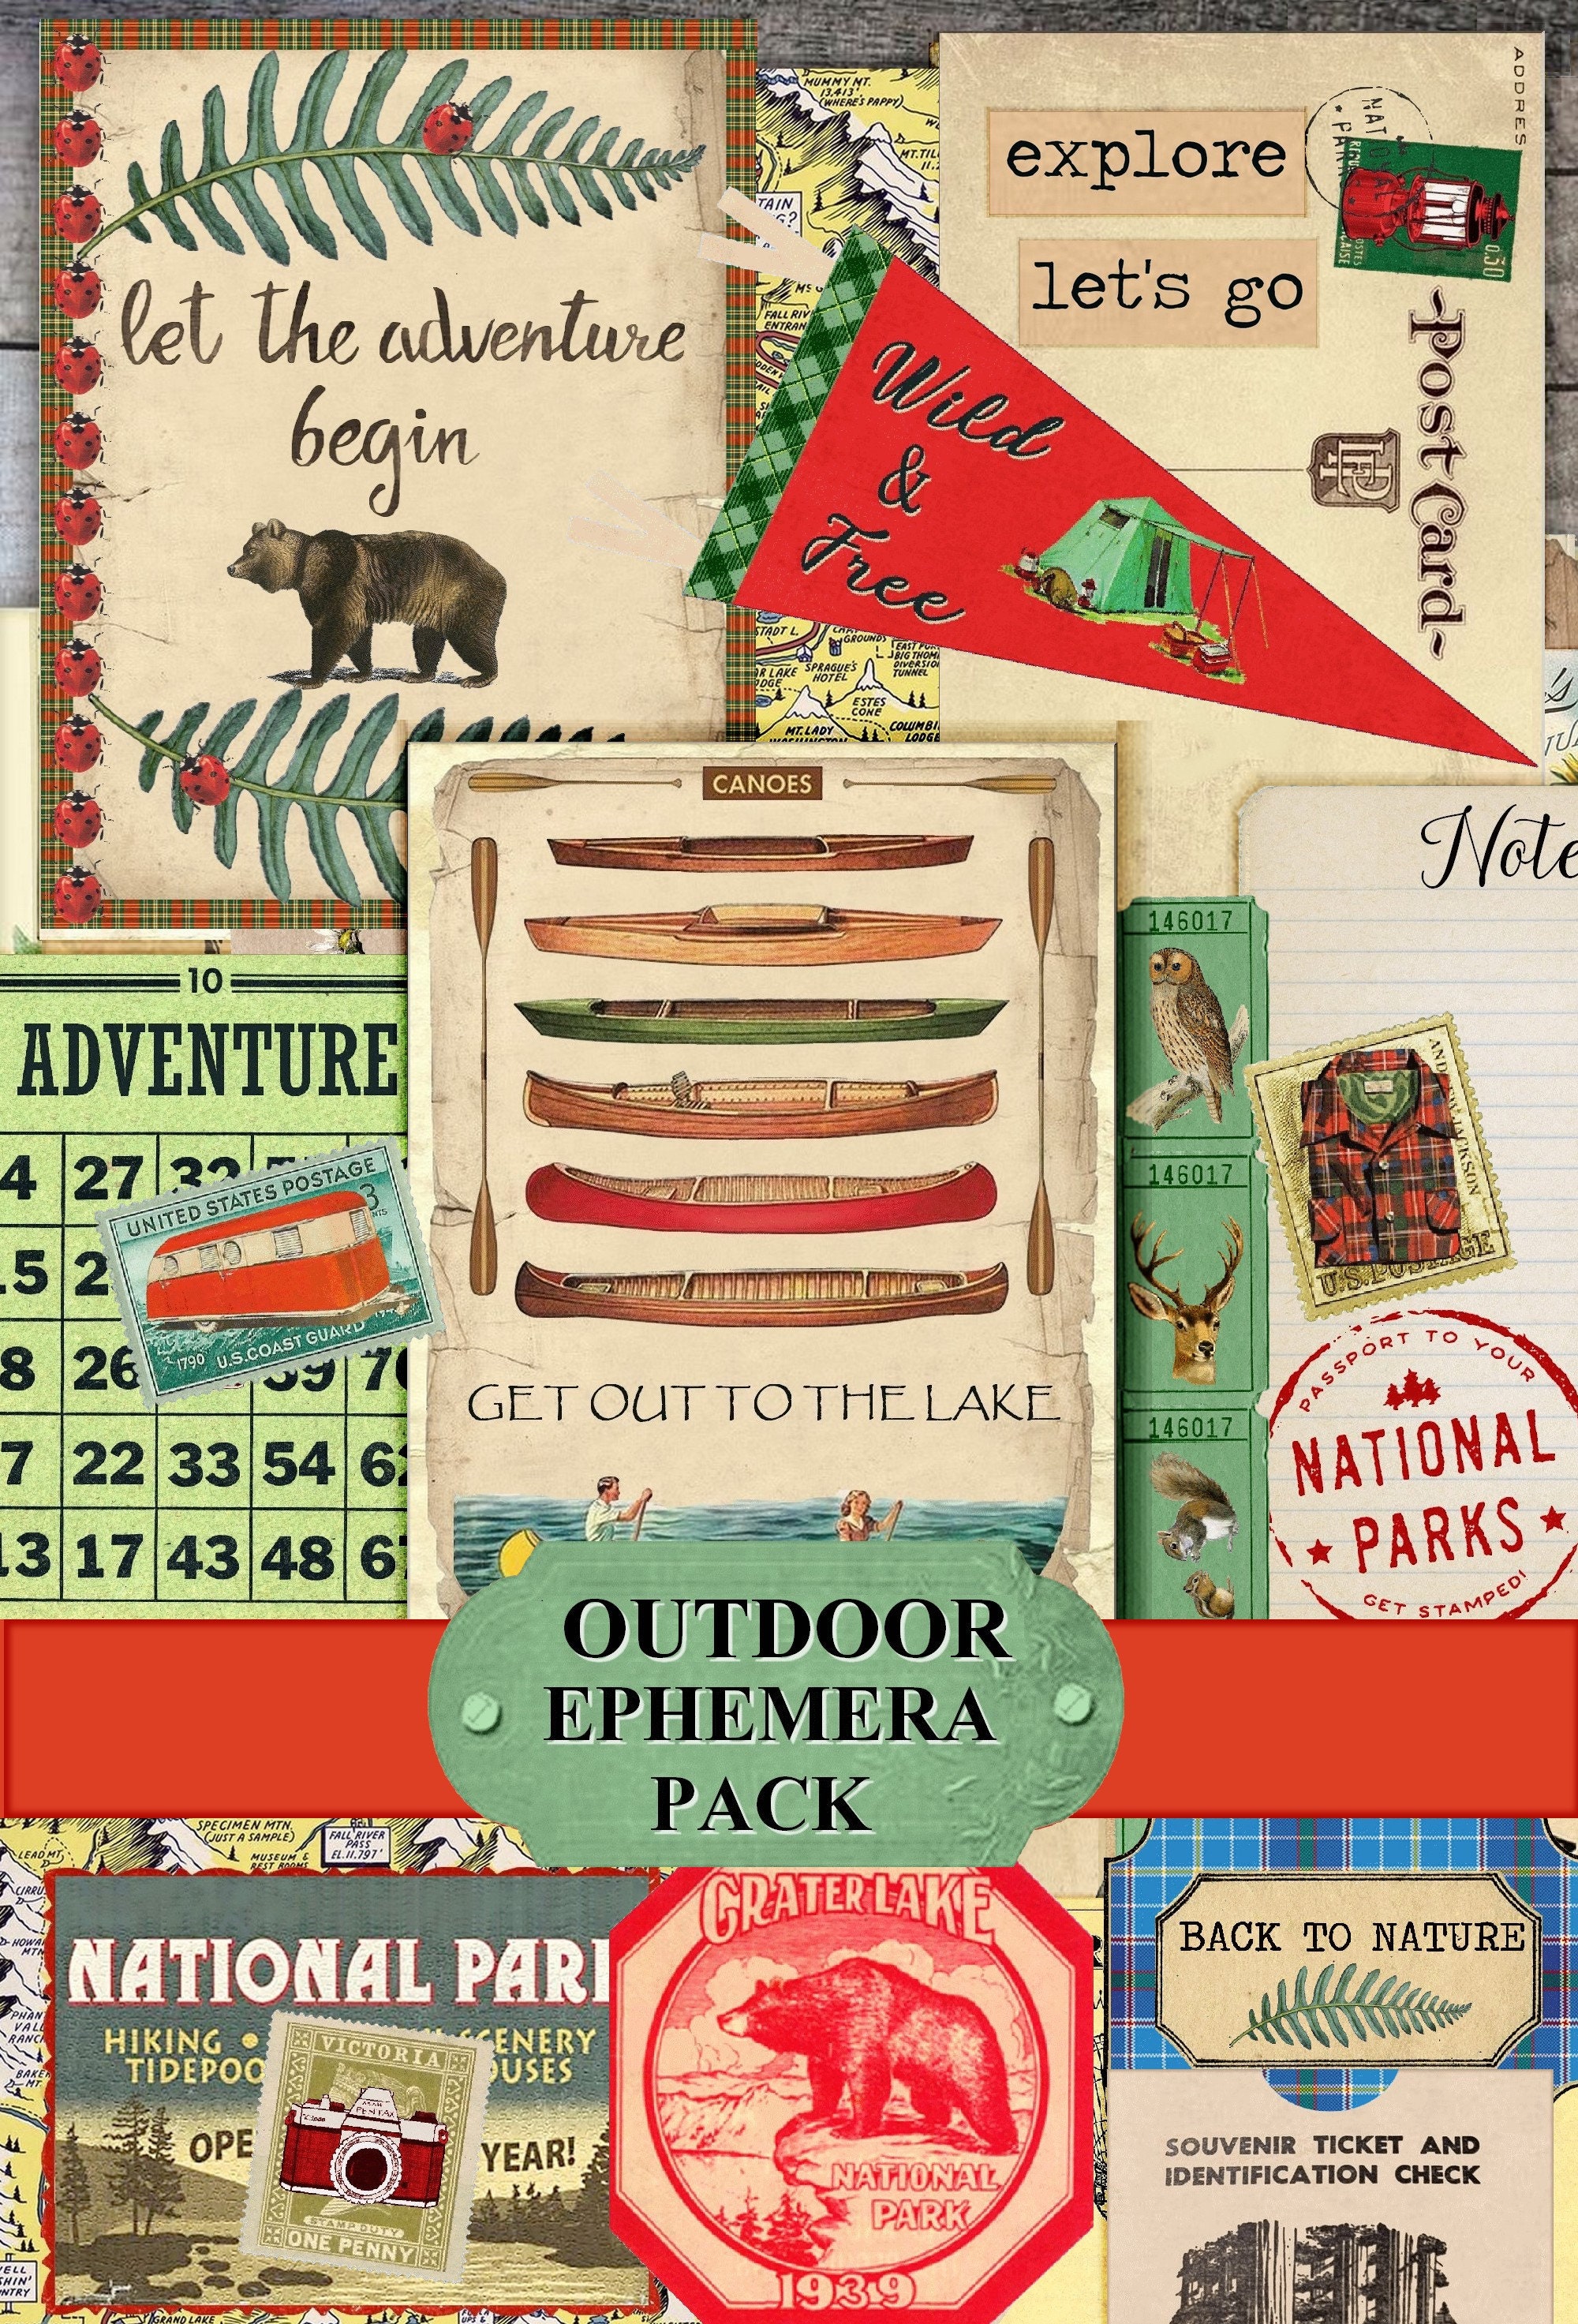 Scrapbook Paper - Double Sided 8 x 8 Sheets: Camping & Hiking Patterns,  Decorative Craft Paper, Scrapbooking, Junk Journaling, Cardmaking, & More